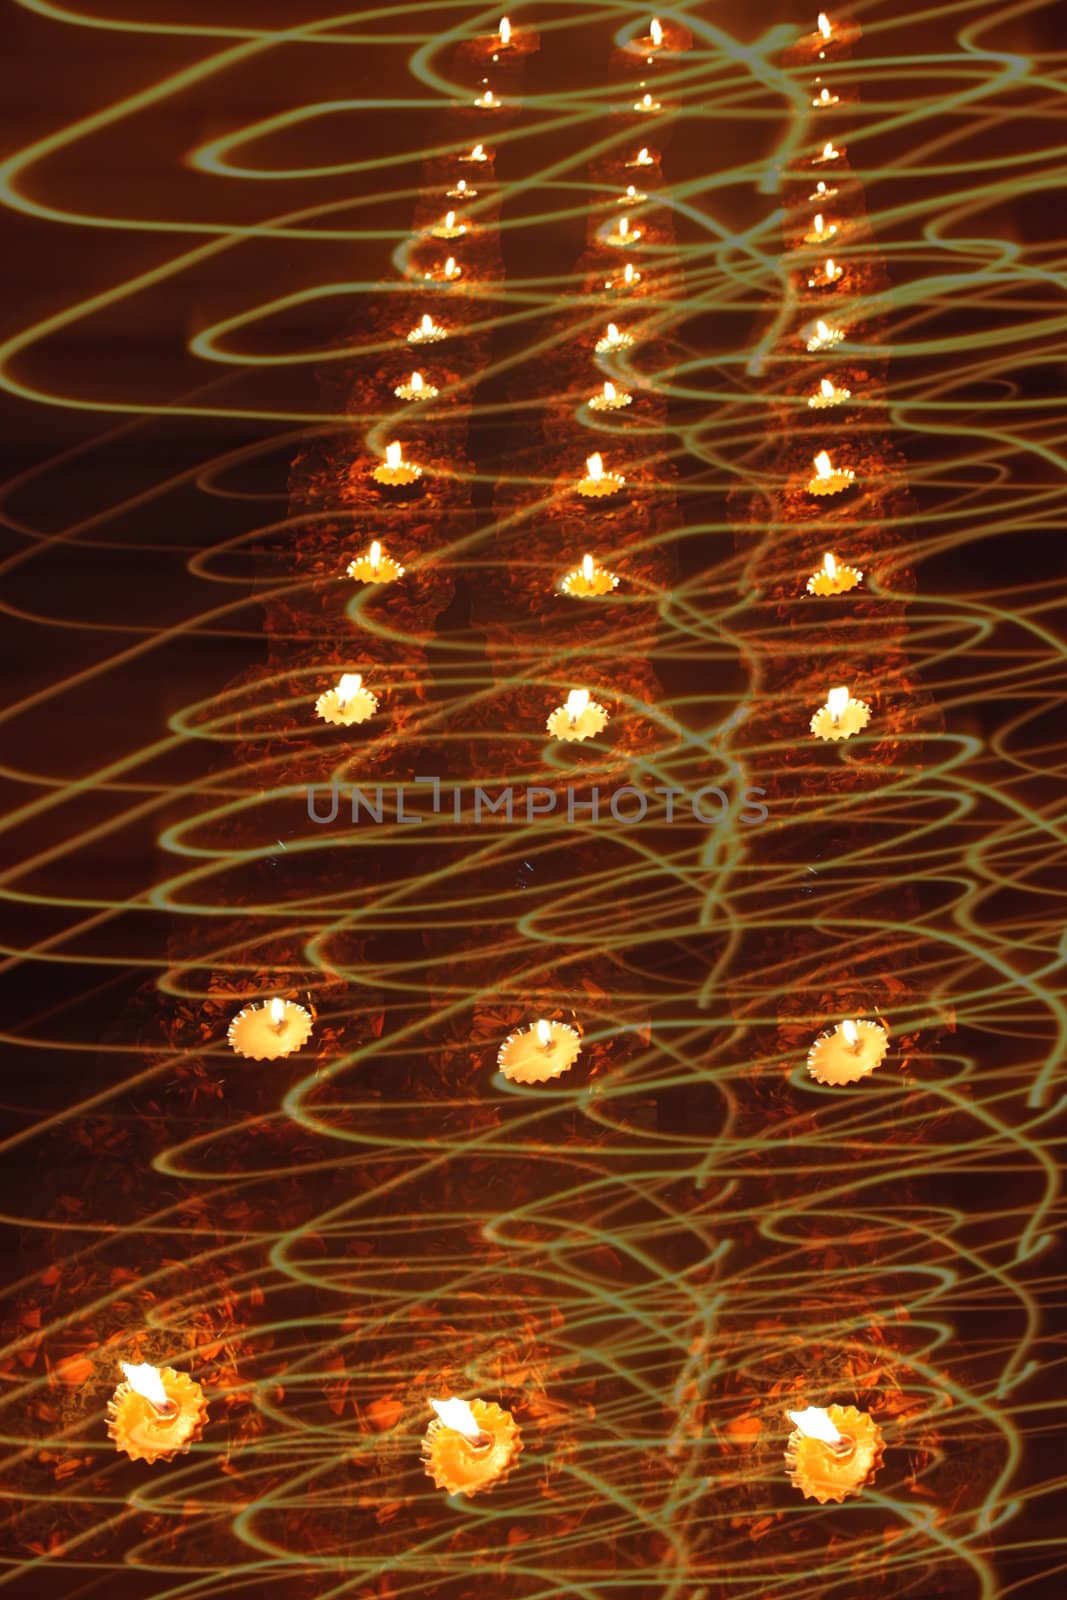 An abstract design of traditional Diwali lamps in light swirls for greetings.